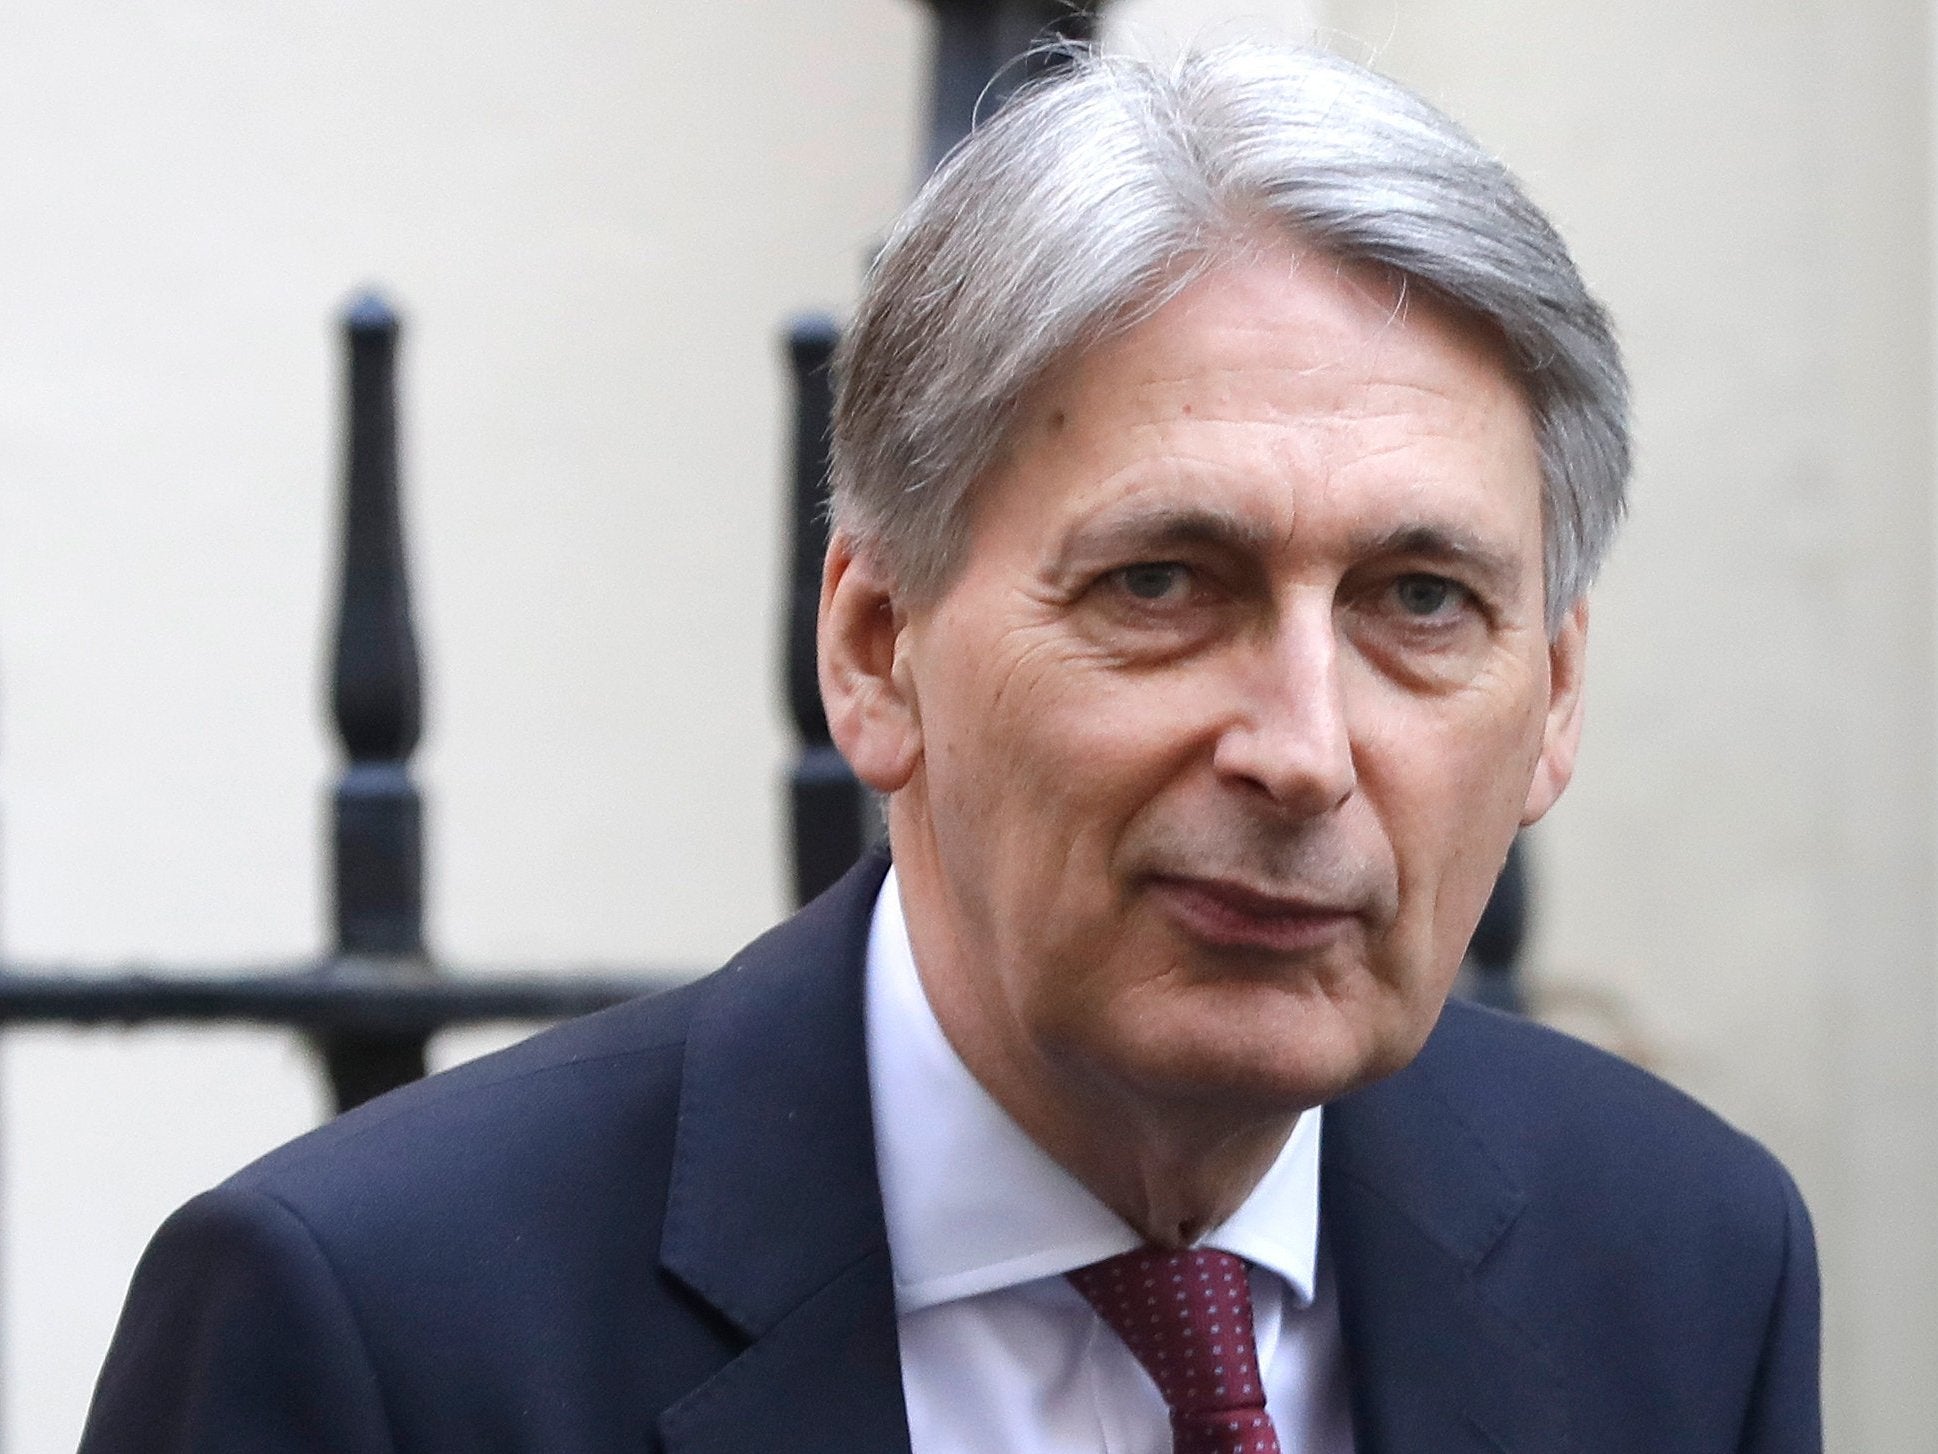 Brexit: Second referendum vote 'very likely', Philip Hammond says